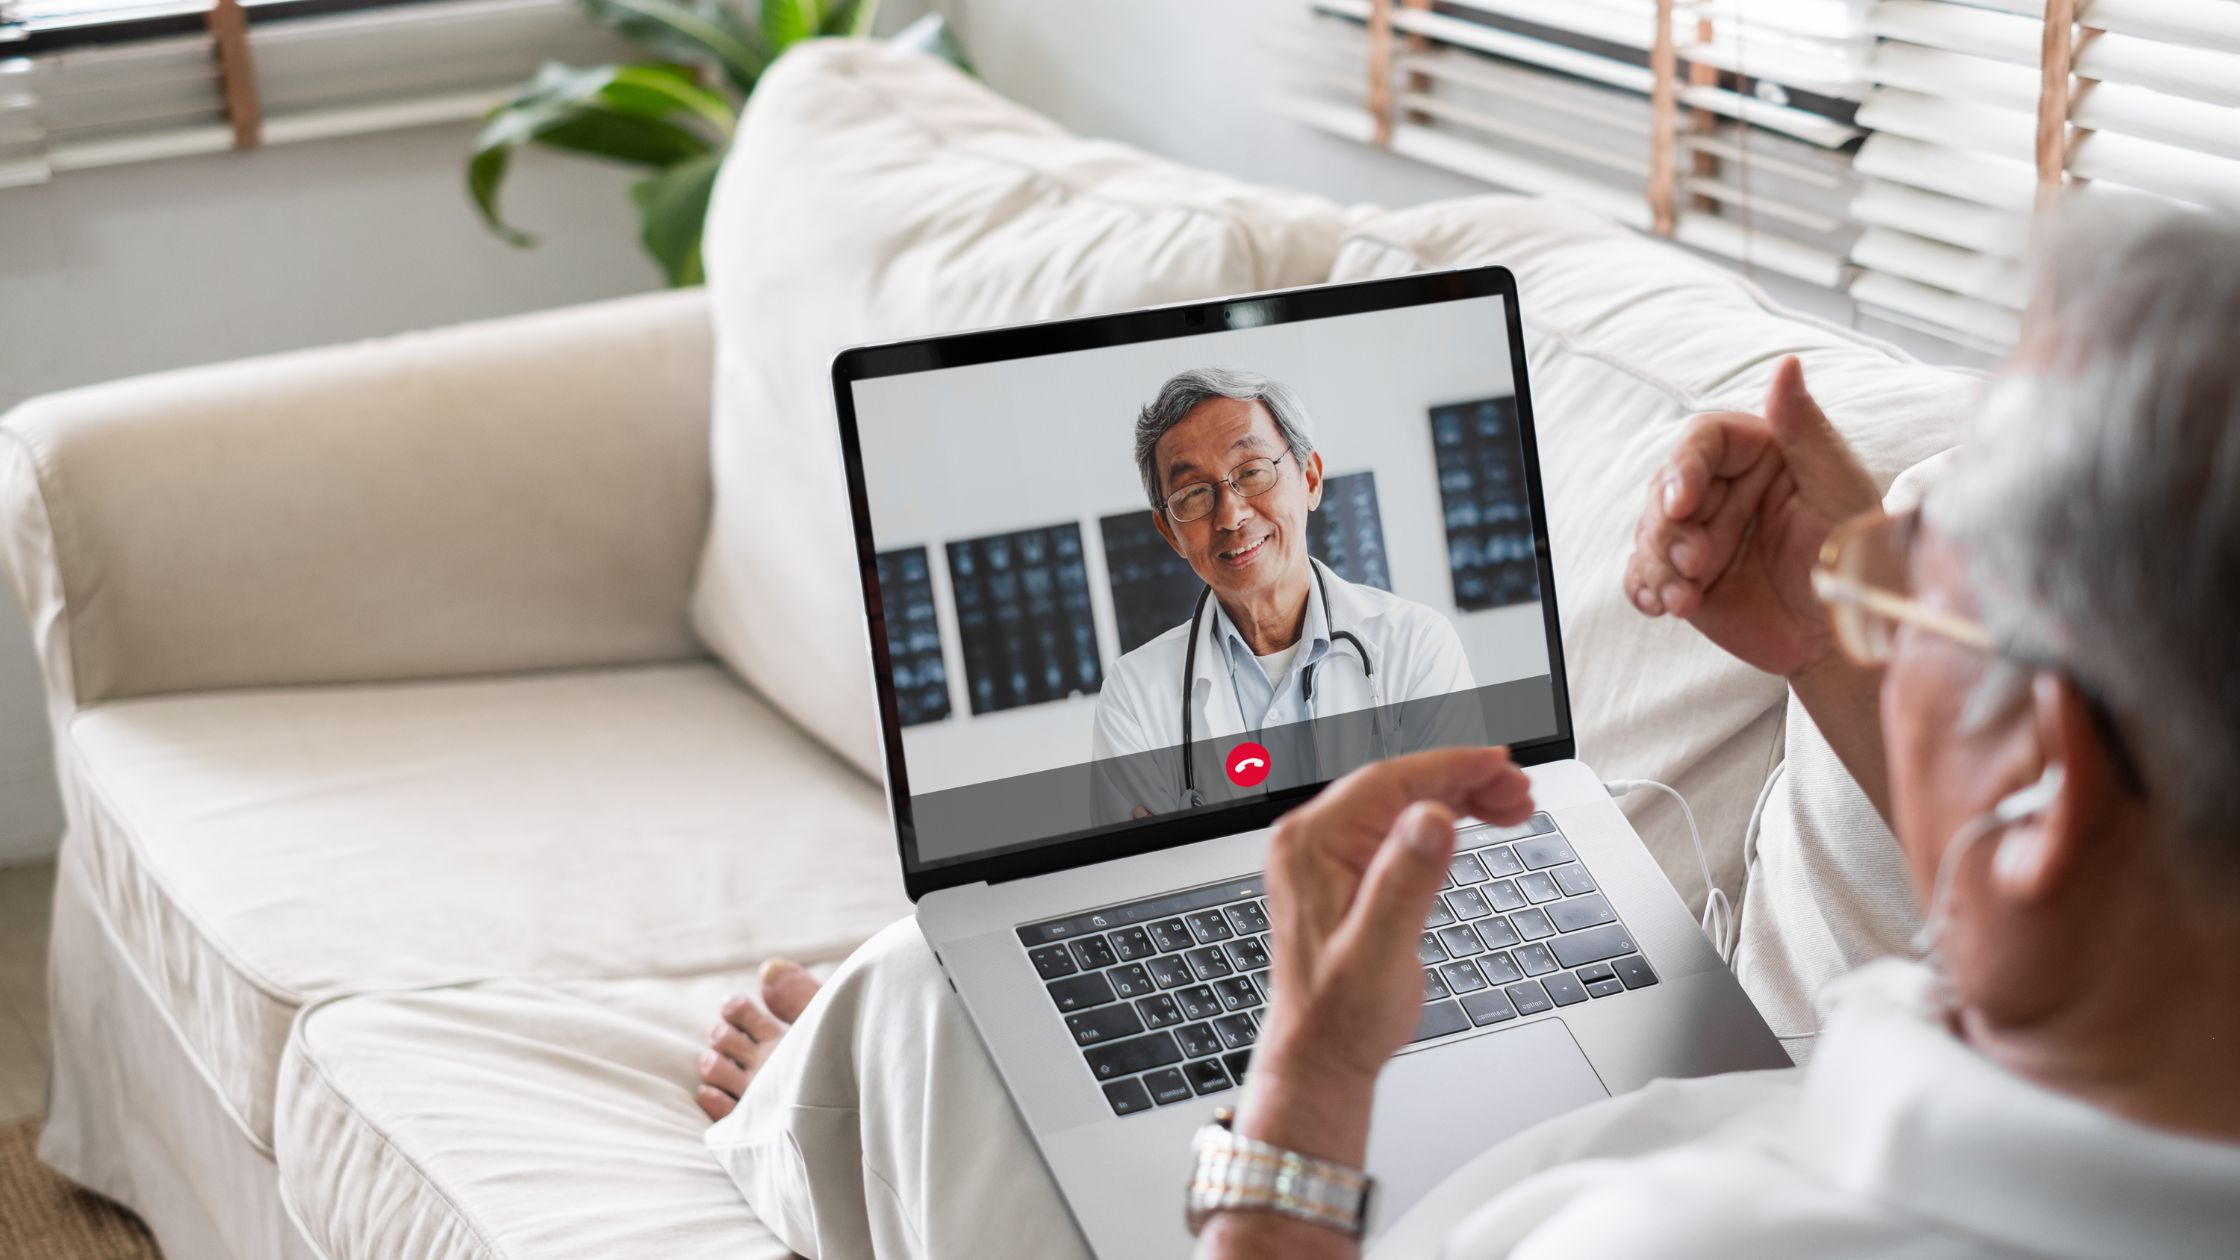 Telehealth Remains Popular, But Can It Avoid Going over a ‘Cliff’?